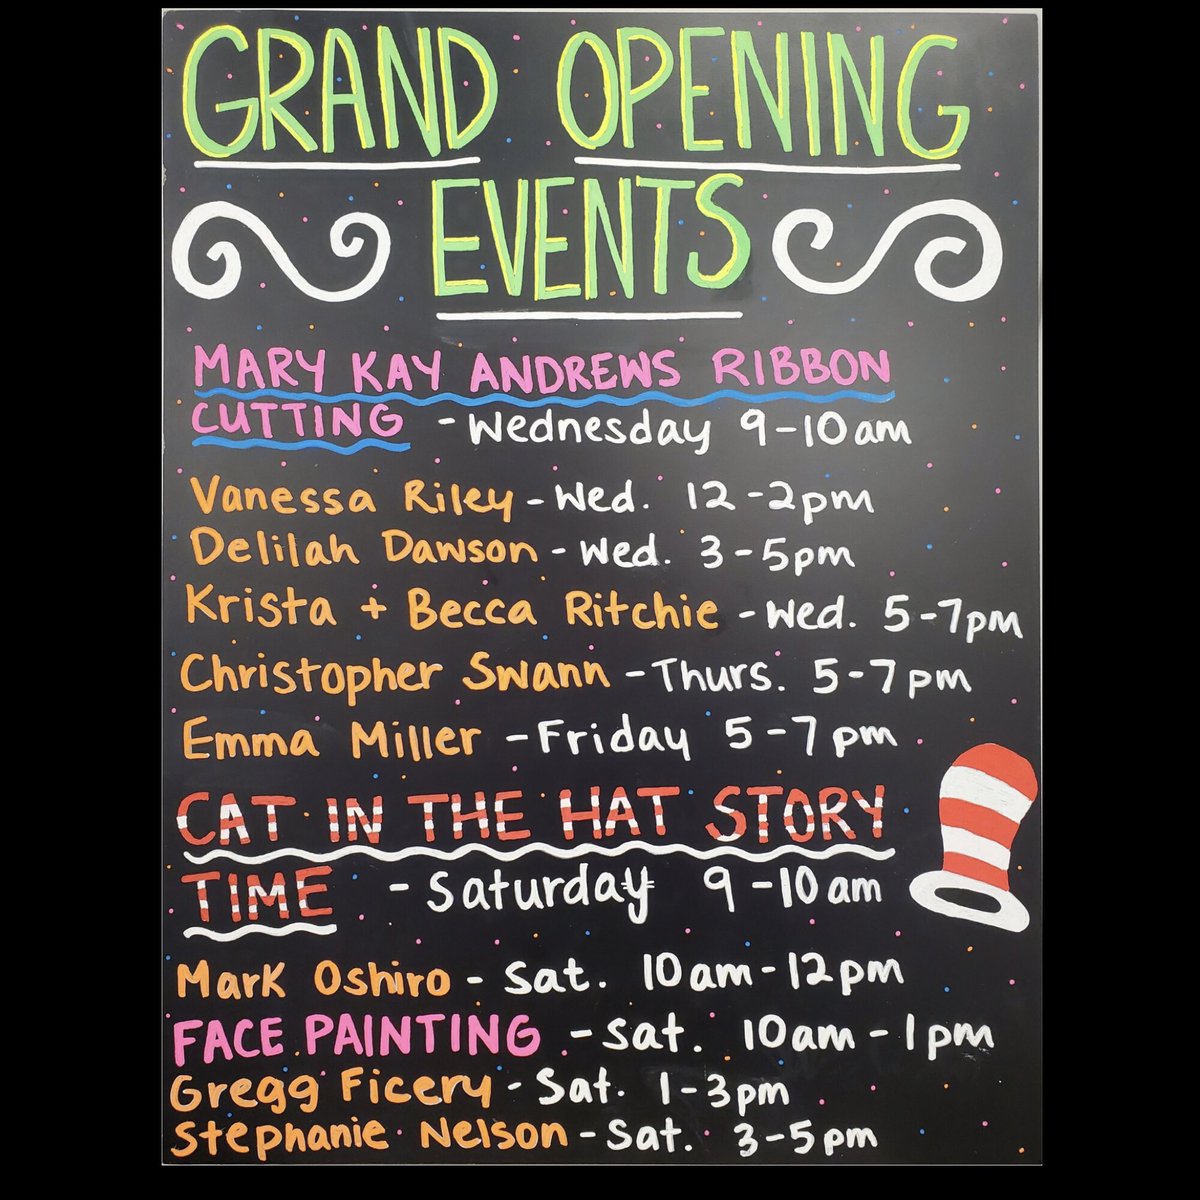 Our #GrandOpening is going to be HUGE! Join us Wednesday, November 1st starting at 9 AM for our ribbon cutting with @mkayandrews, and then we have @VanessaRiley, @delilahsdawson, and #kristaandbeccaritchie! Plus more #localauthors and fun events throughout the week!